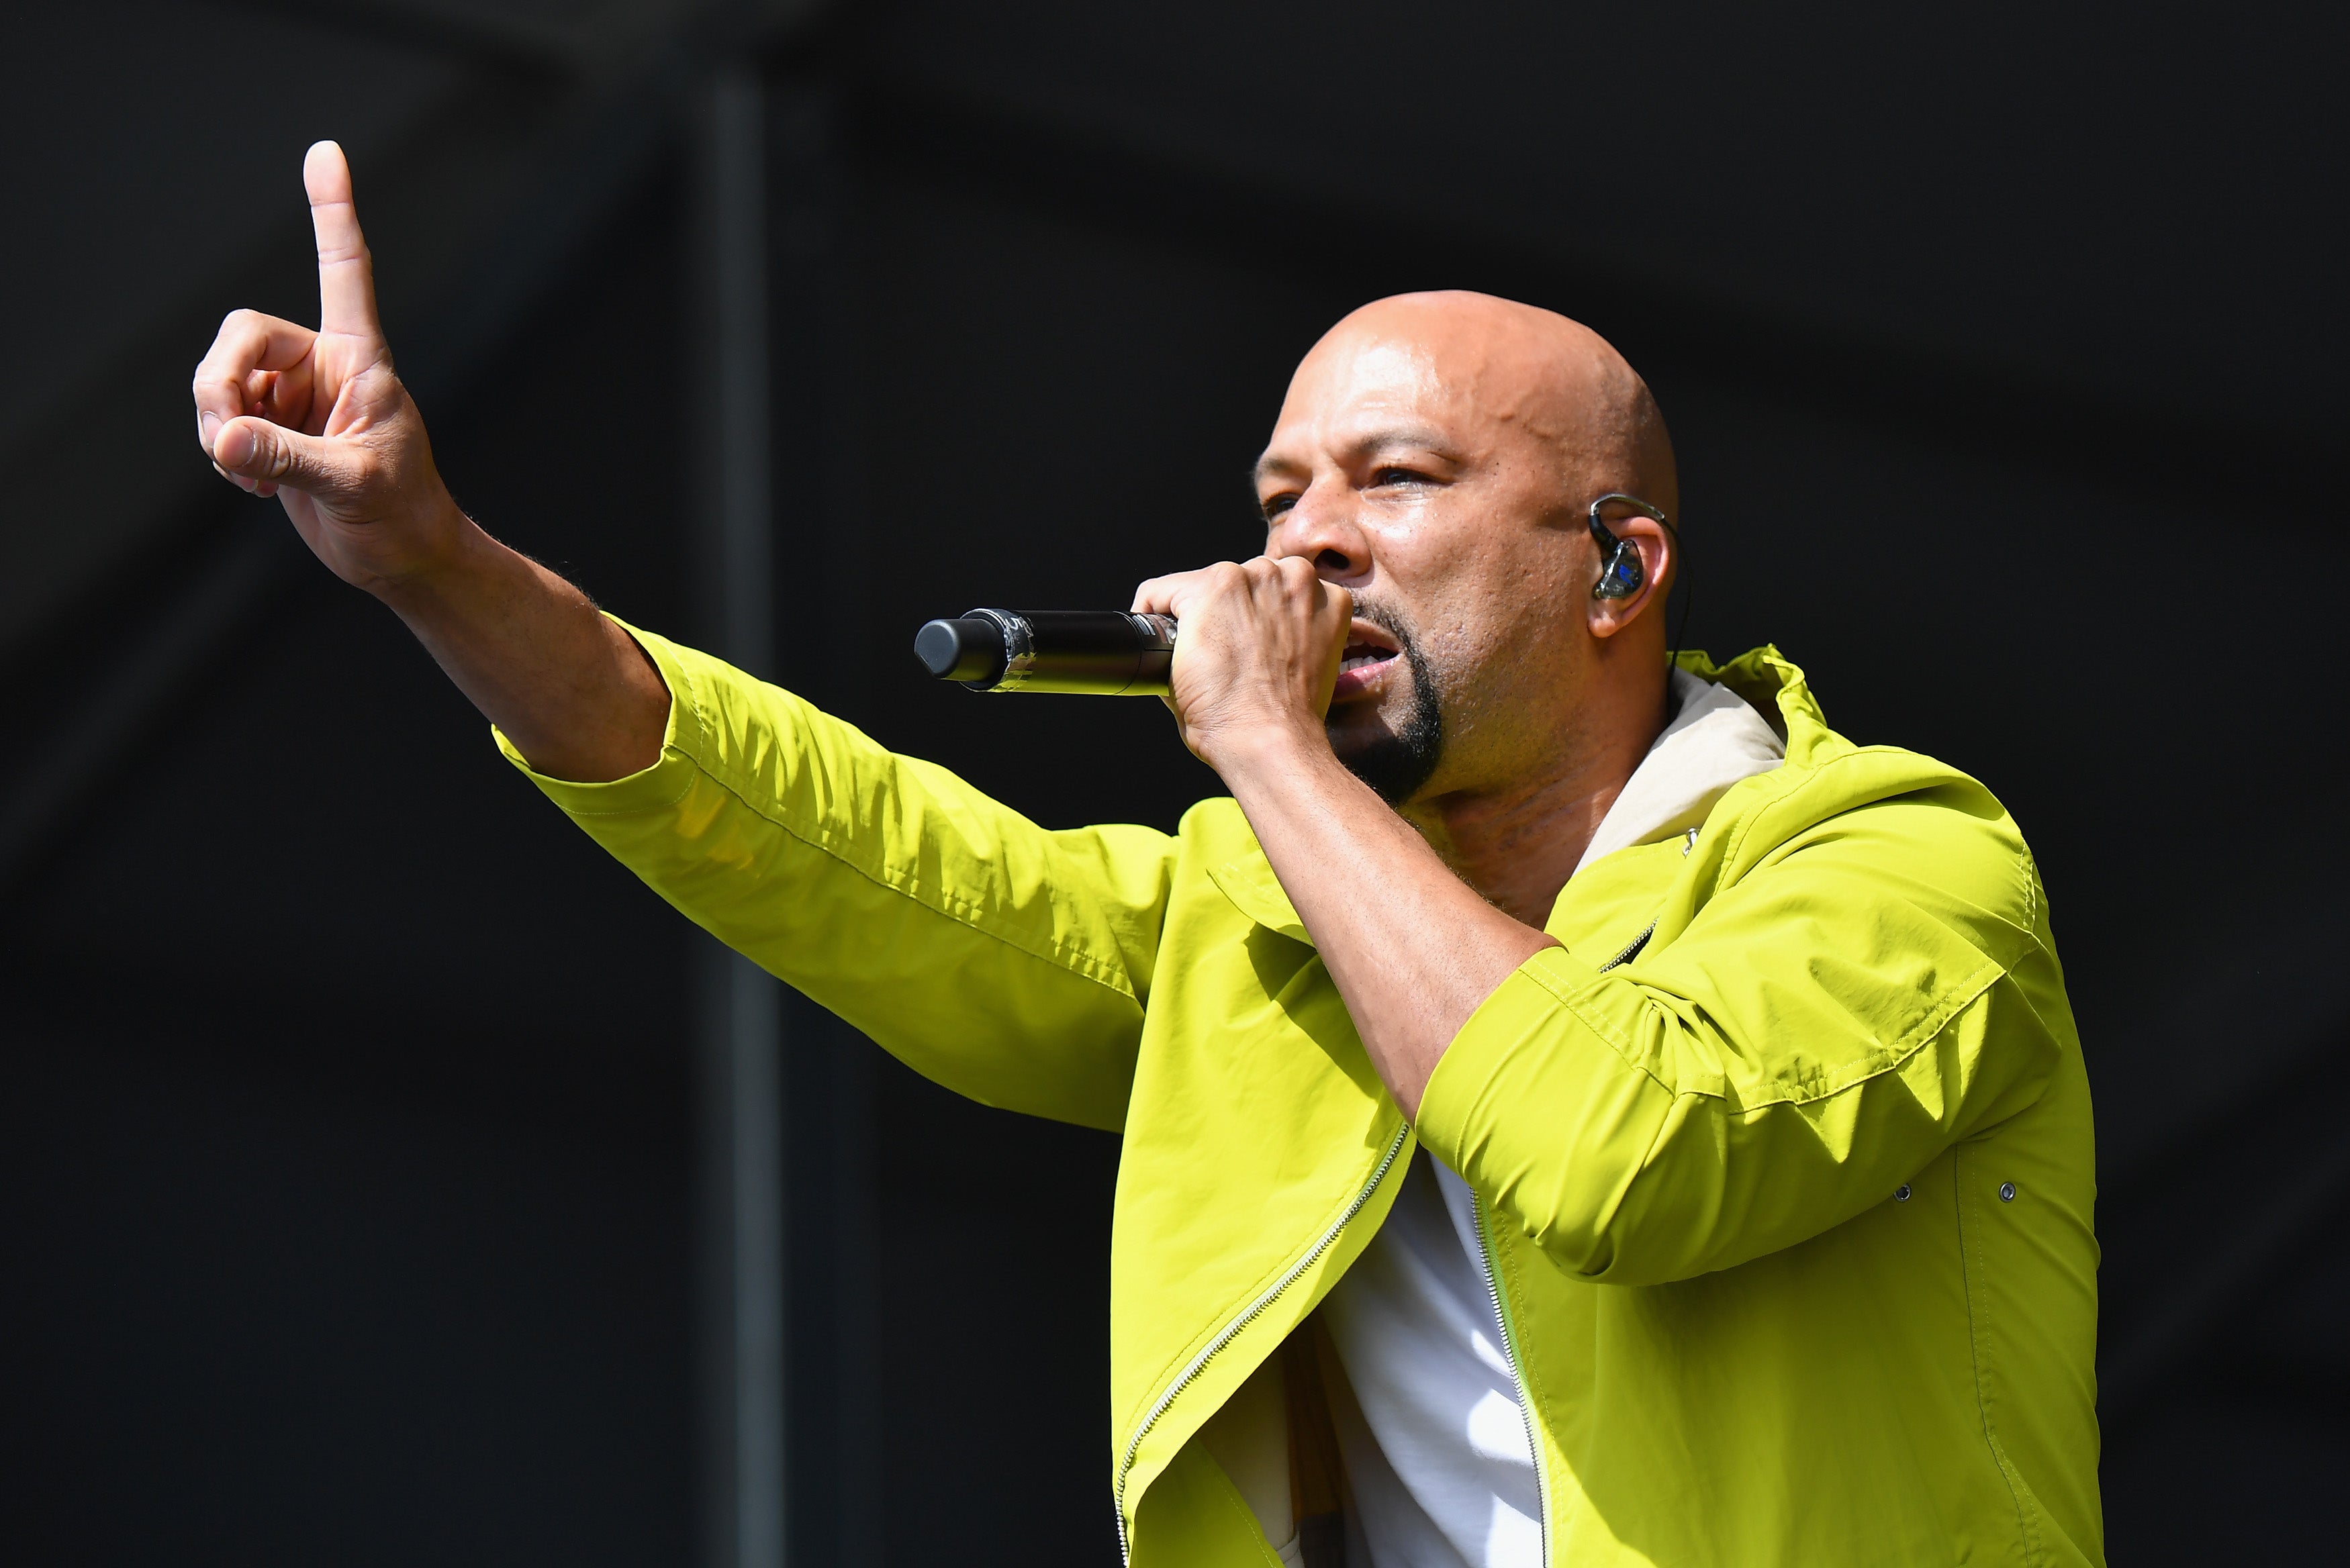 Common Wants You To Vote This November: 'Don't Give Your Power Away'